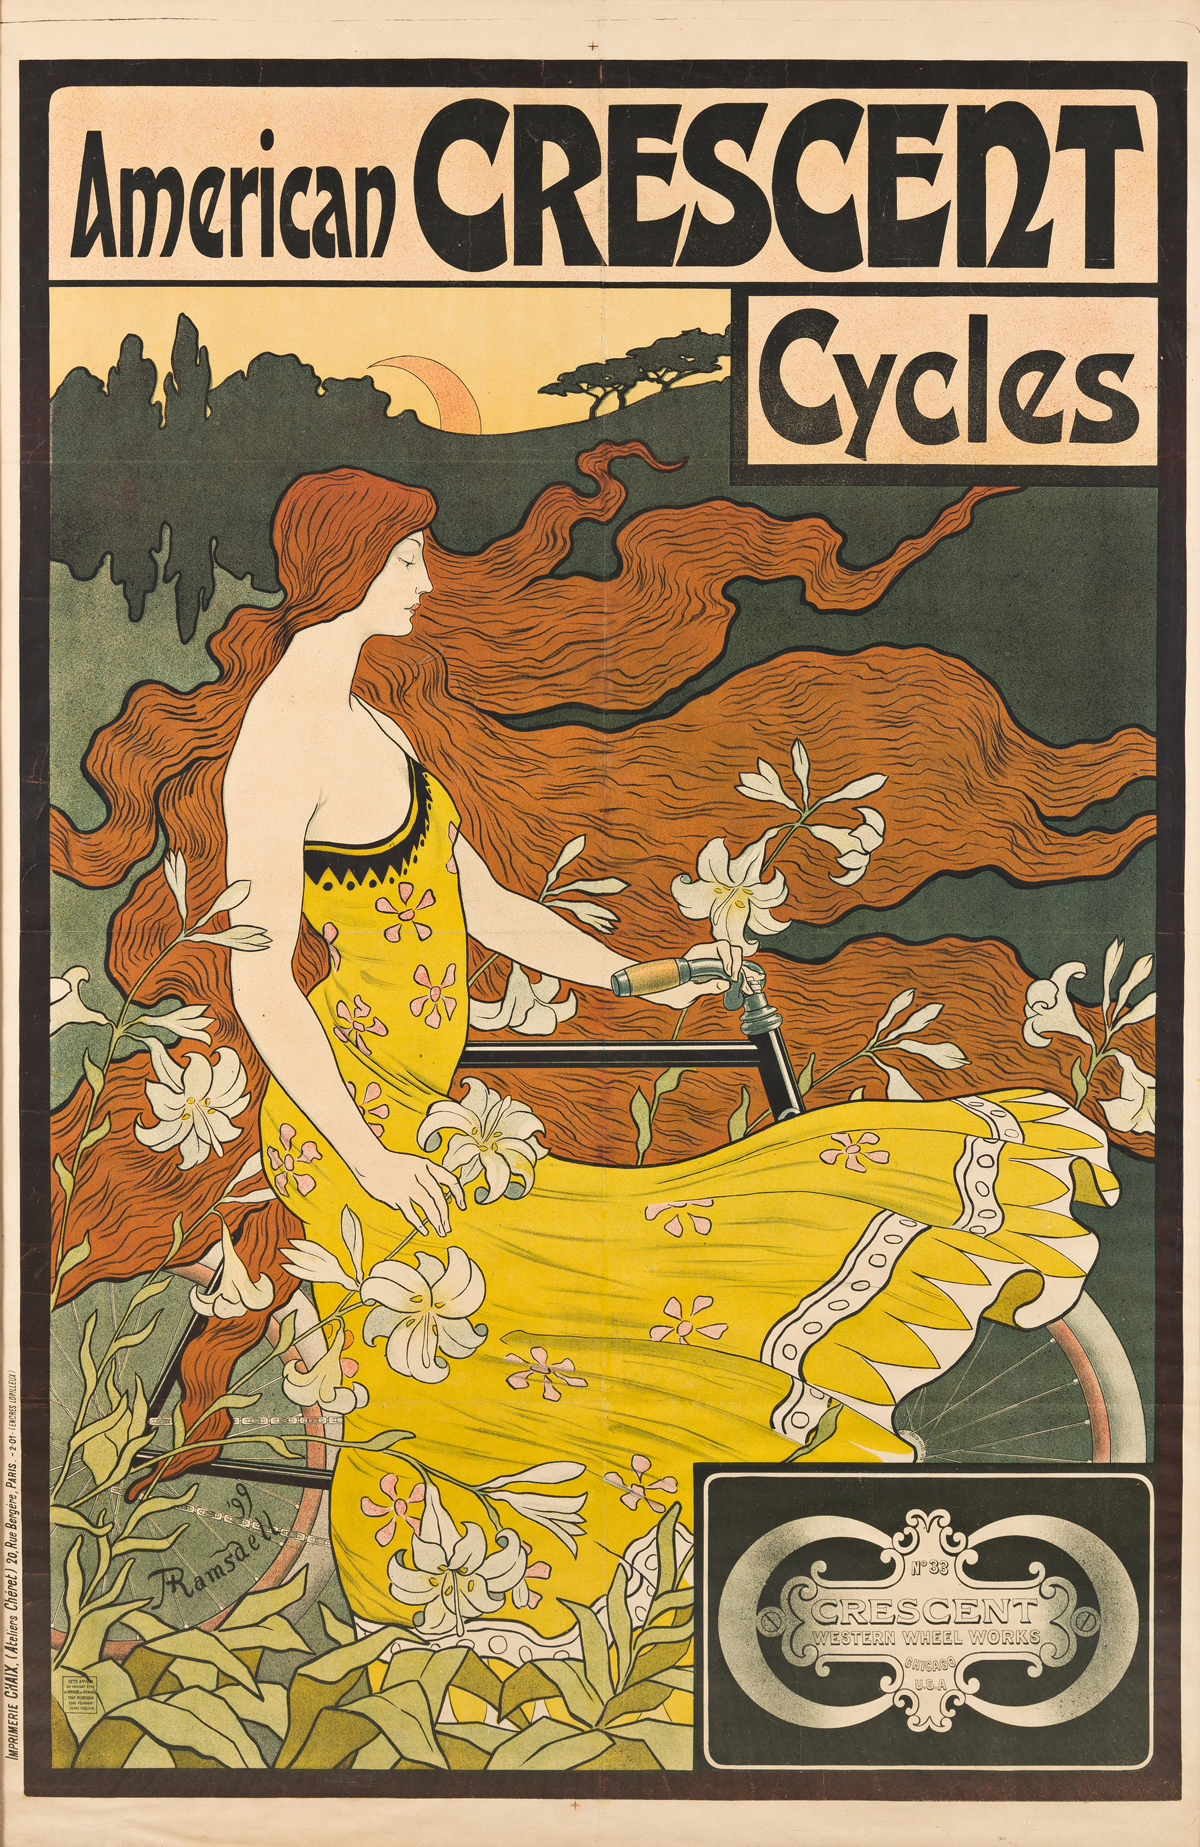 FREDERICK WINTHROP RAMSDELL (1865-1915).  AMERICAN CRESCENT CYCLES. 1899. 62½x41 inches, 158¾x104 cm. Chaix, Paris.